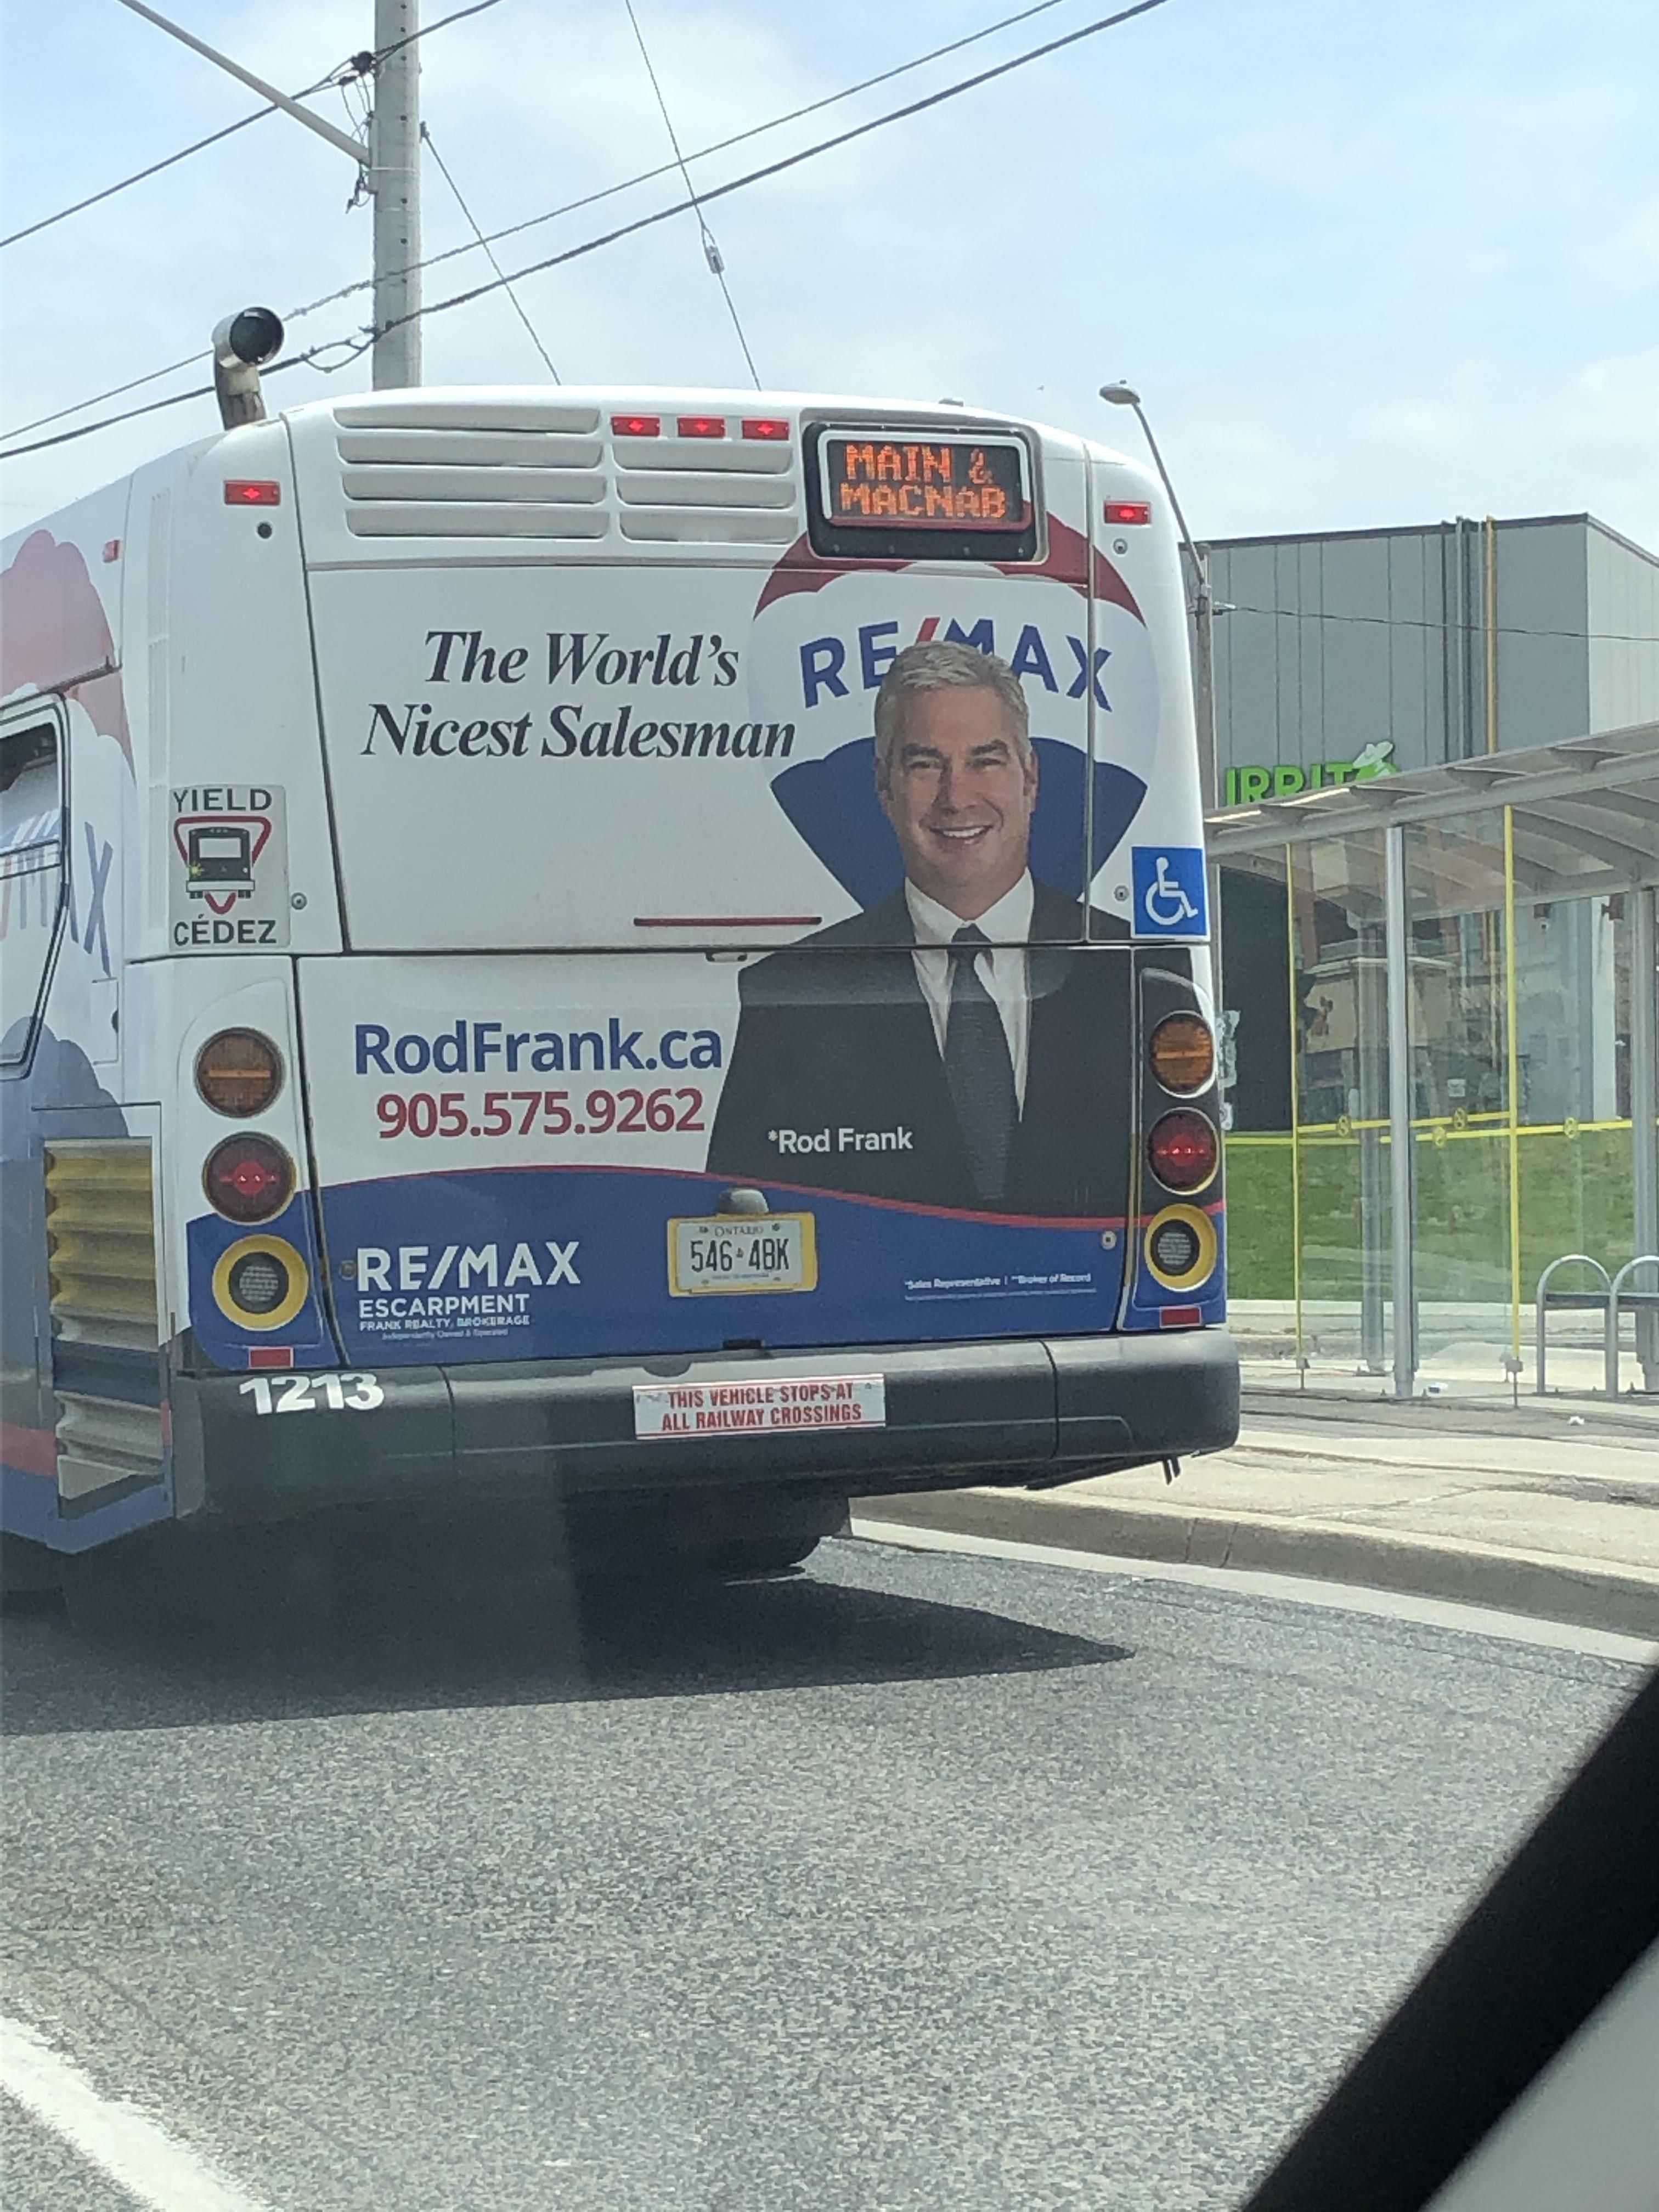 Bottom of Remax air balloon makes it look like Rod is wearing a Dracula cape